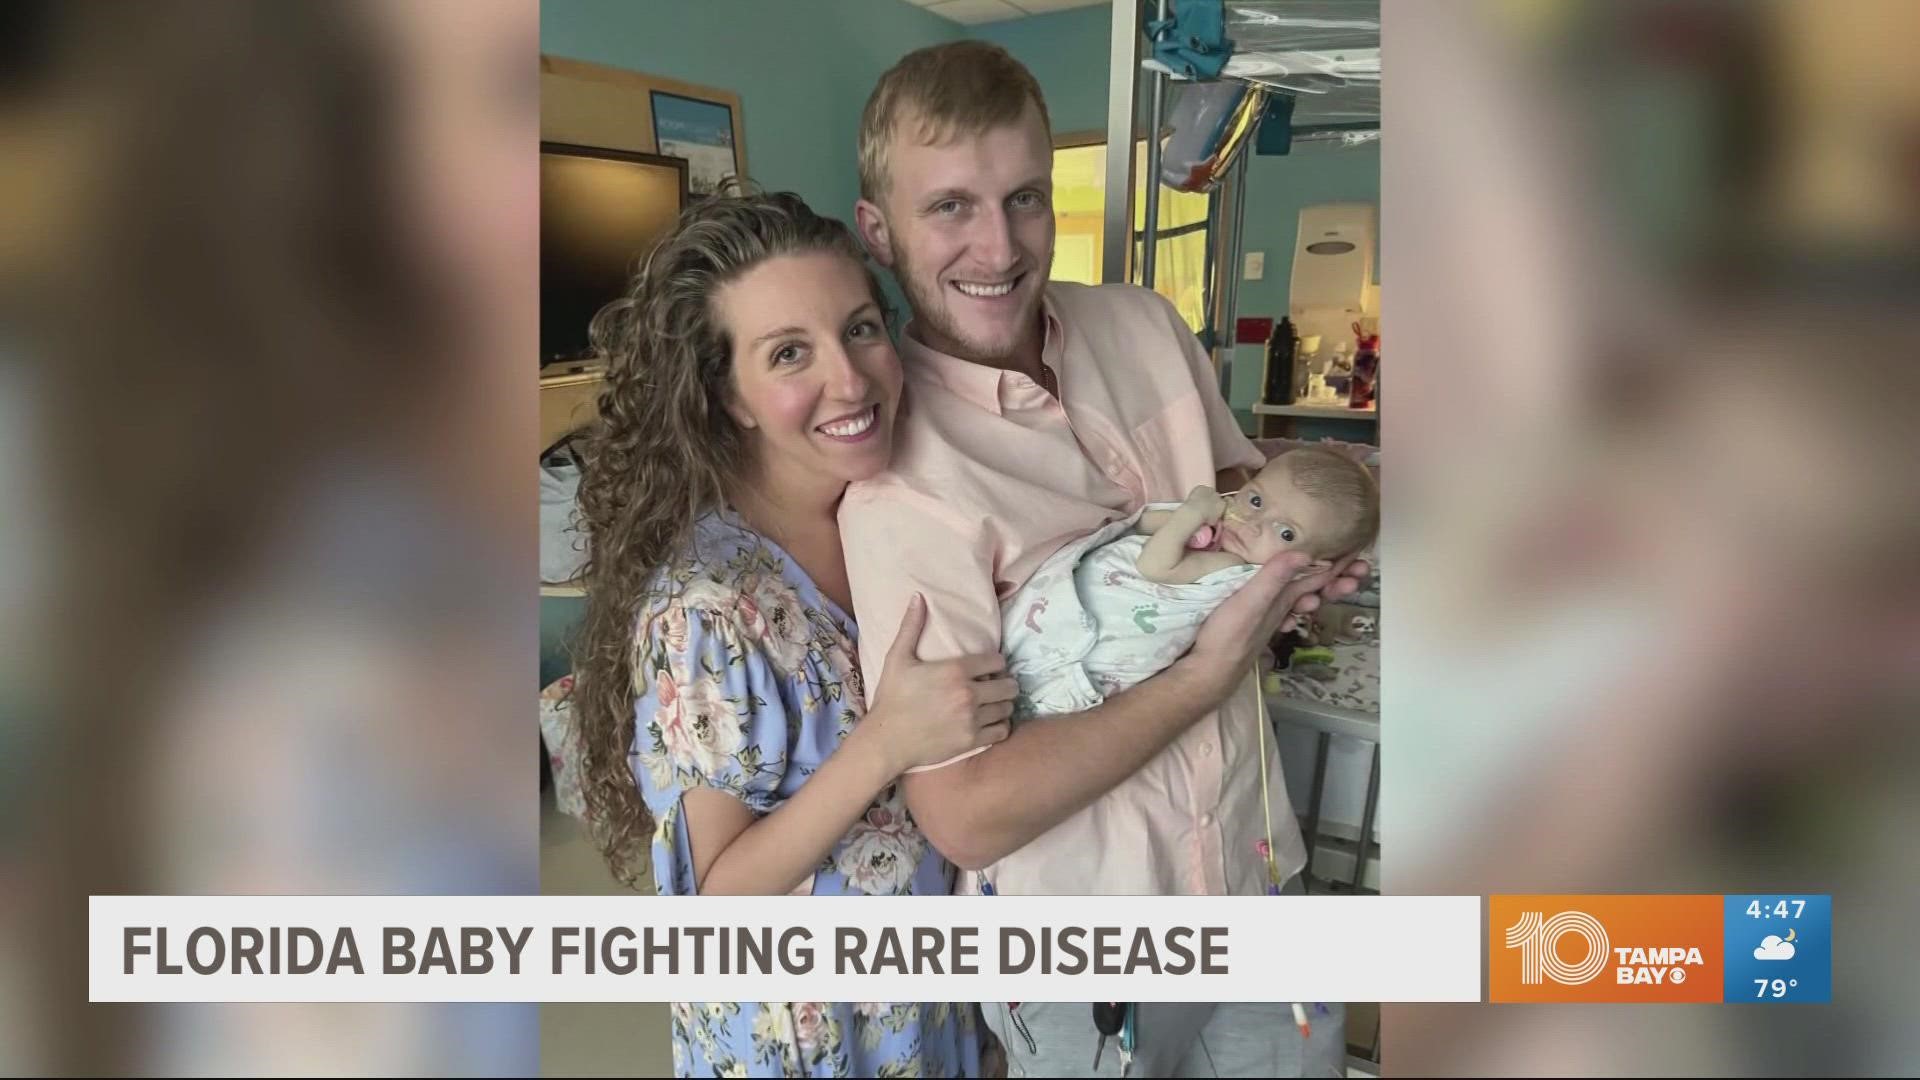 The baby isn't expected to live a long life, but her family refuses to quit fighting.